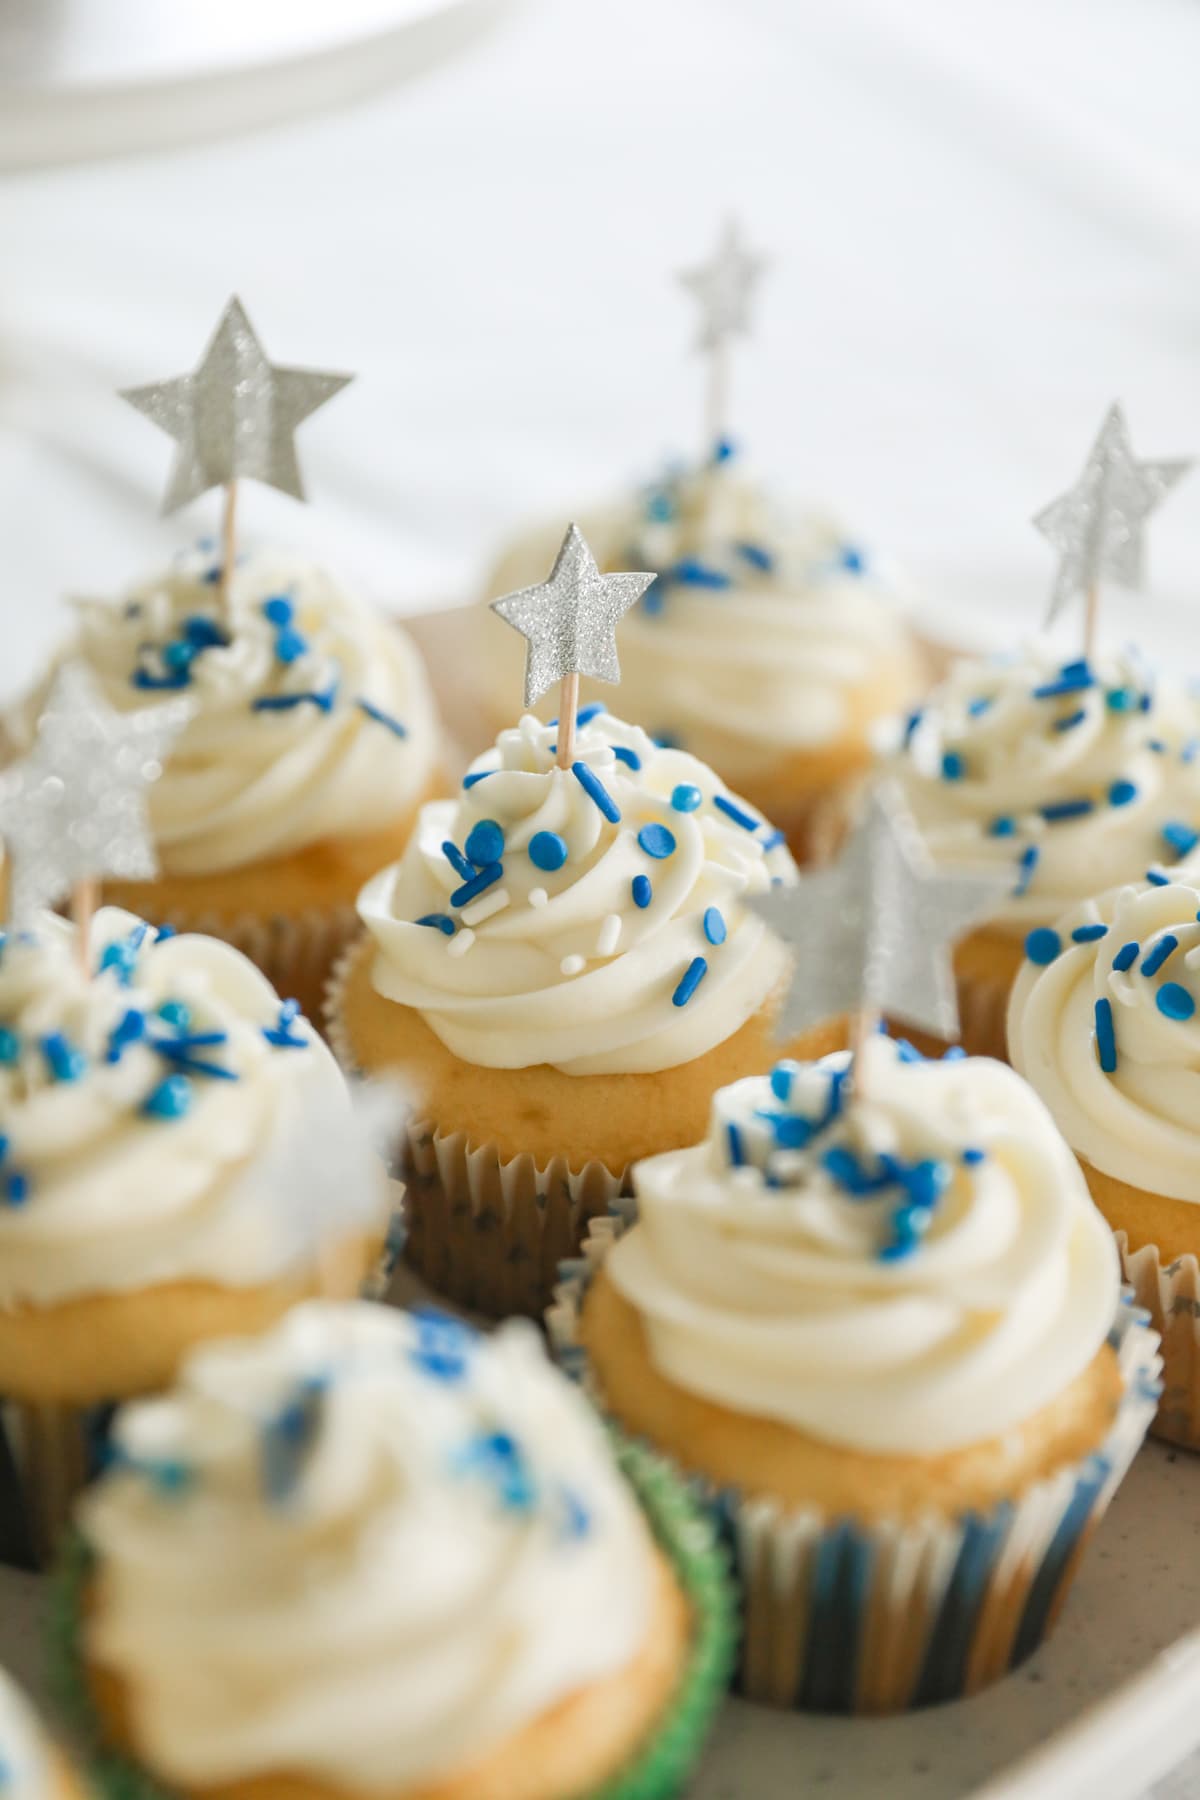 vanilla cupcakes with star decorations